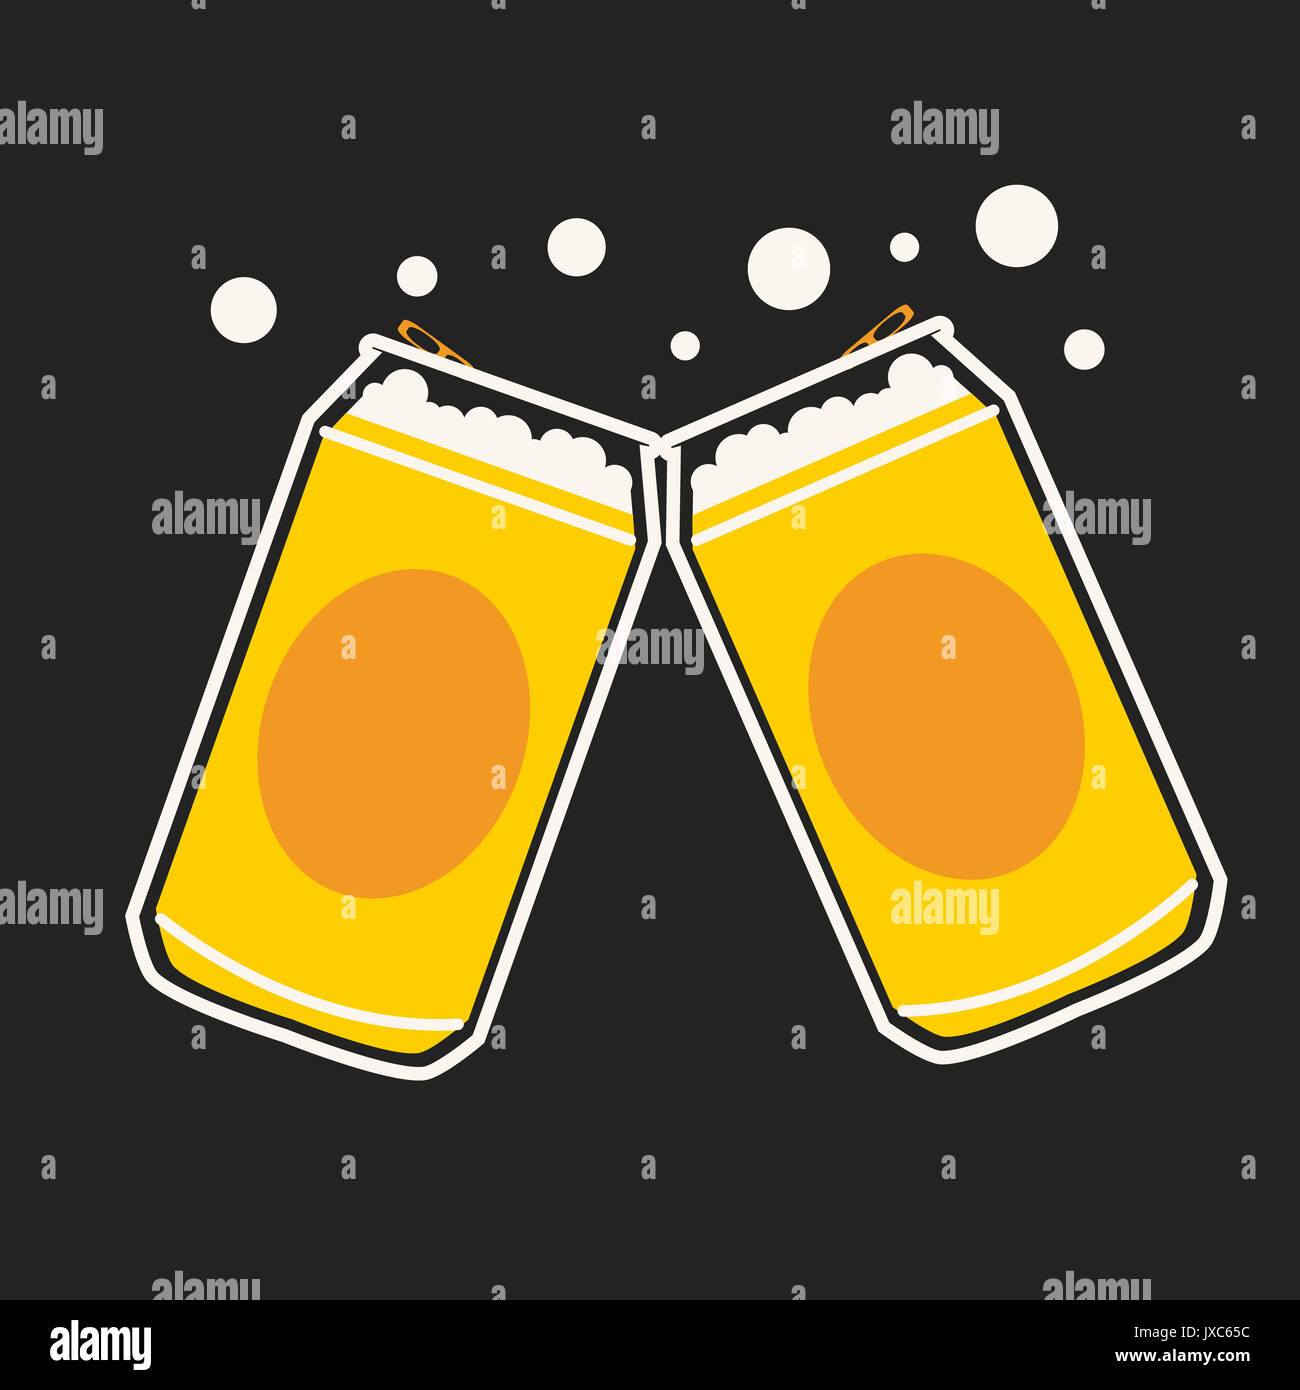 beer can party icon design vector Stock Photo